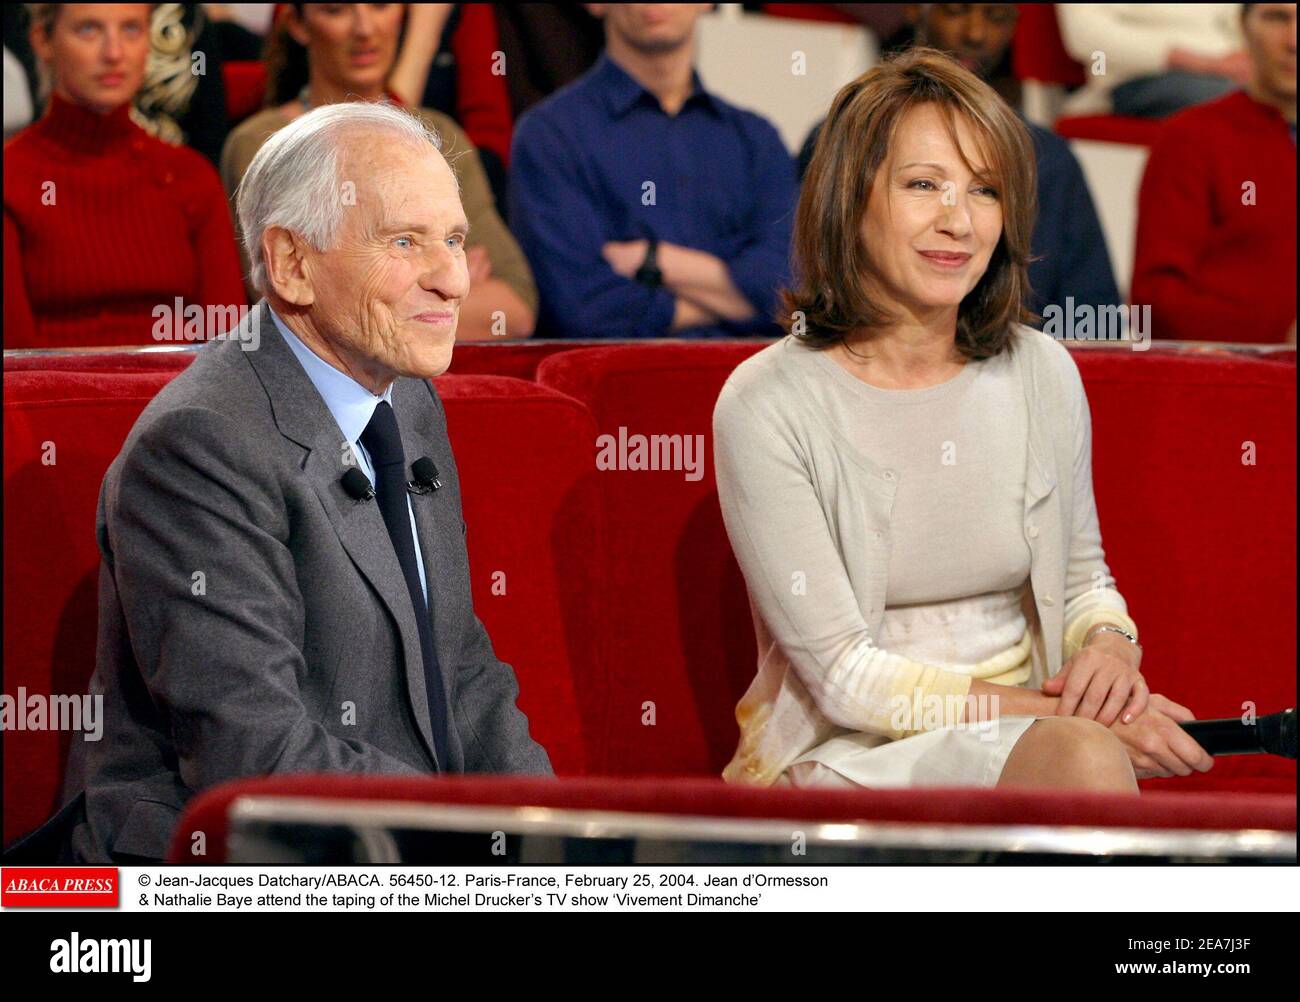 © Jean-Jacques Datchary/ABACA. 56450-12. Paris-France, February 25, 2004. Jean d'Ormesson & Nathalie Baye attend the taping of the Michel Drucker's TV show ïVivement Dimanche' Stock Photo